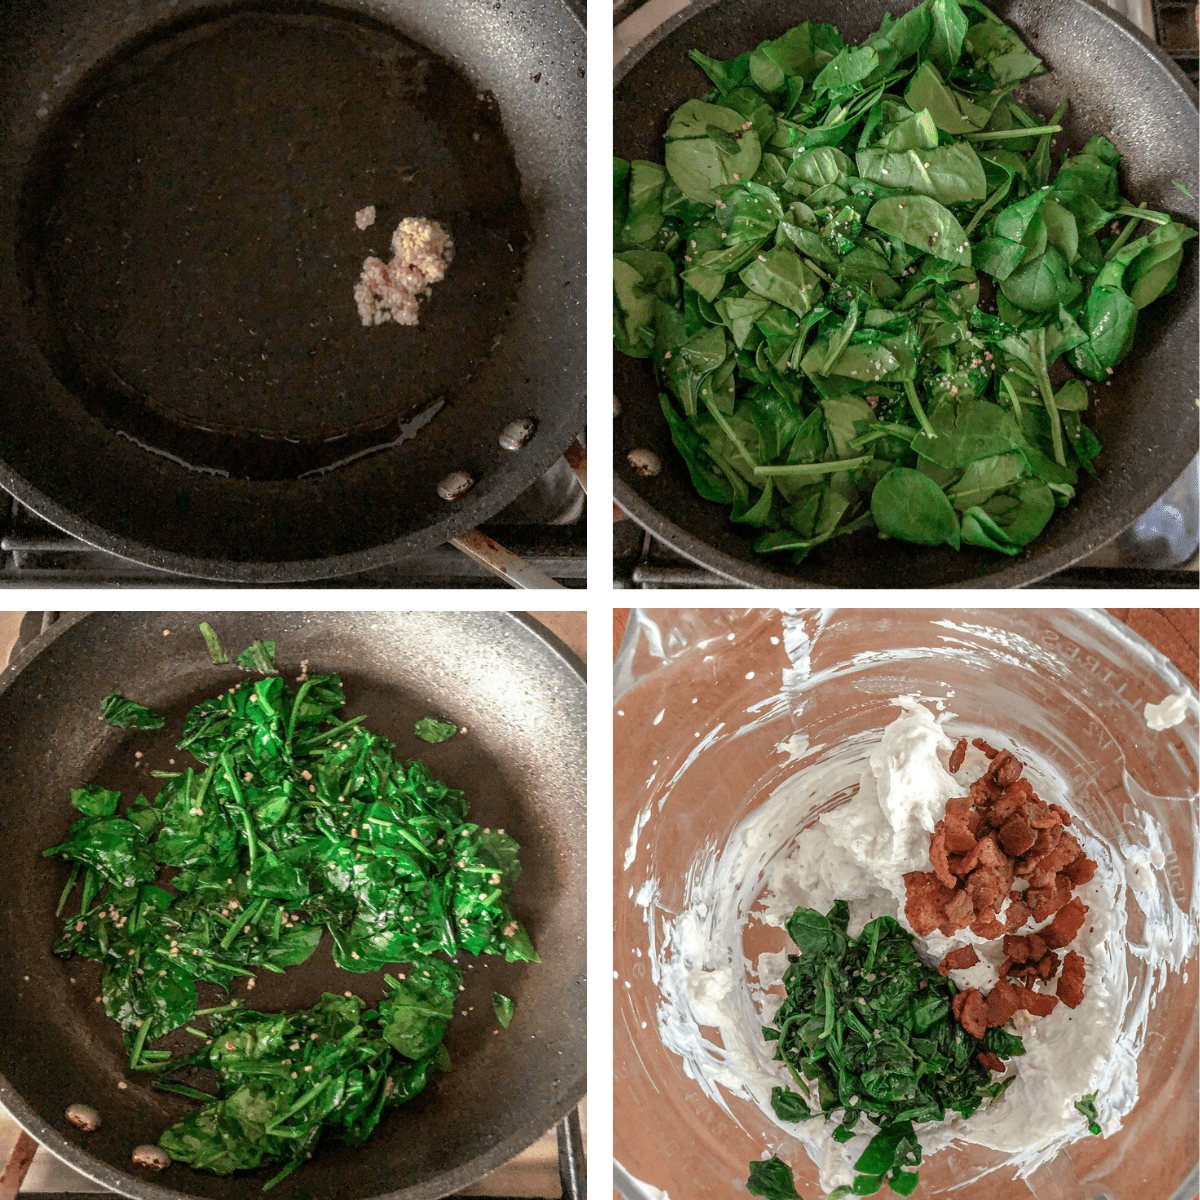 Wilting spinach in a skillet with garlic.